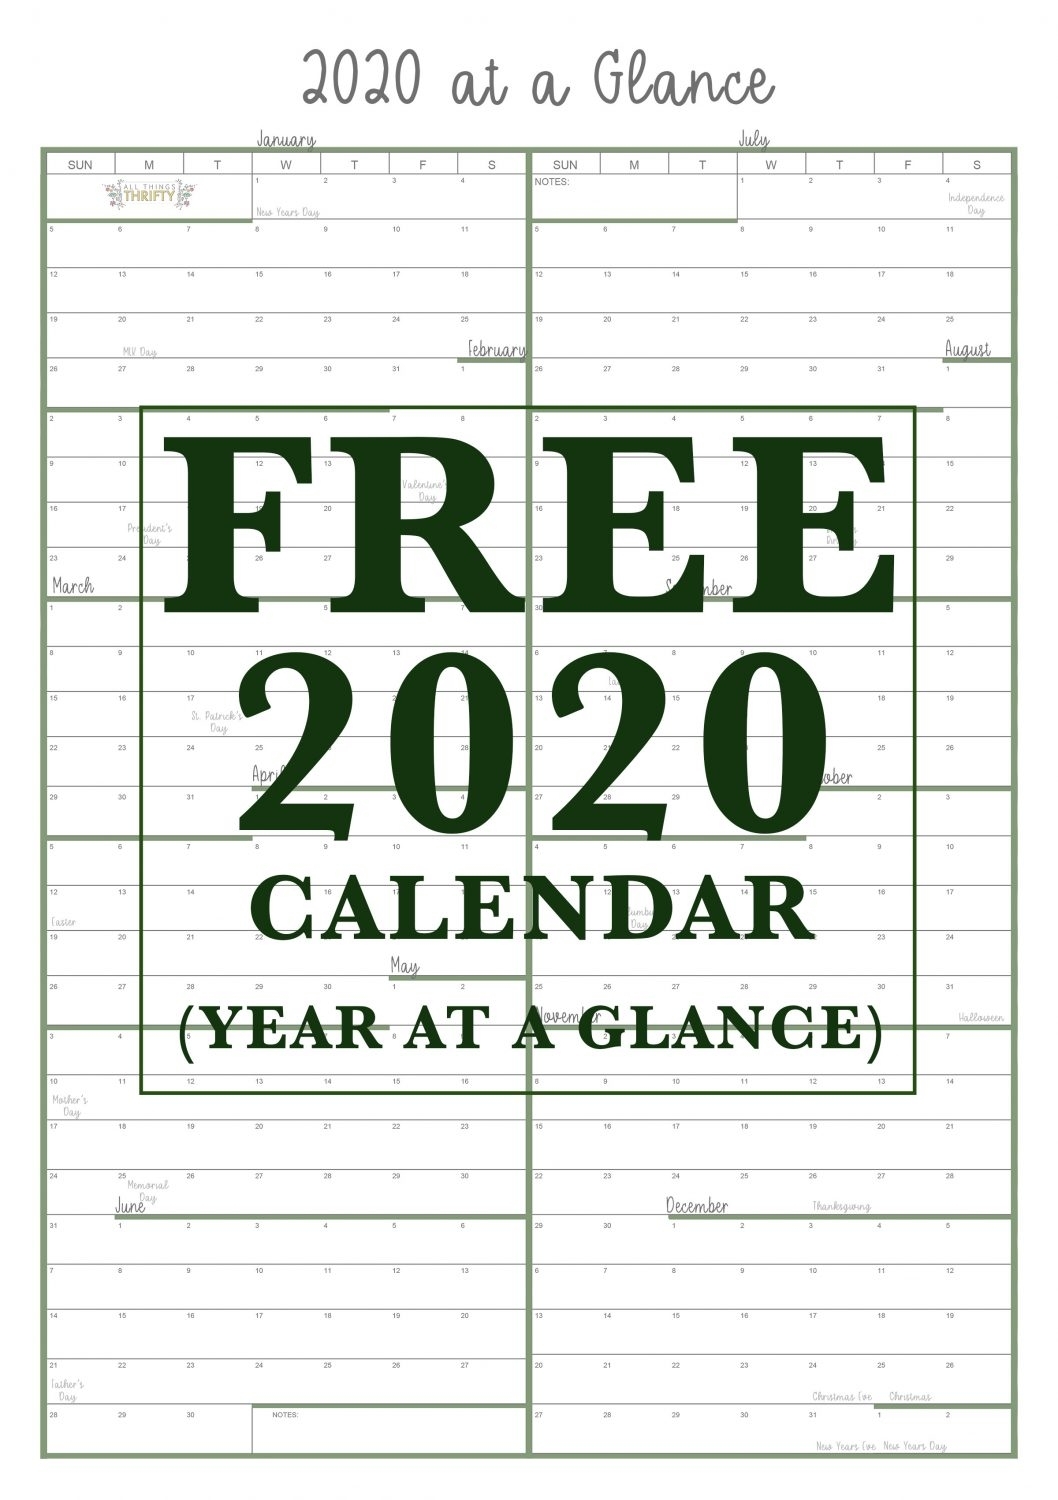 Year At A Glance Free Printable Calendar | All Things Thrifty with regard to Free 2020 Calendar At A Glance